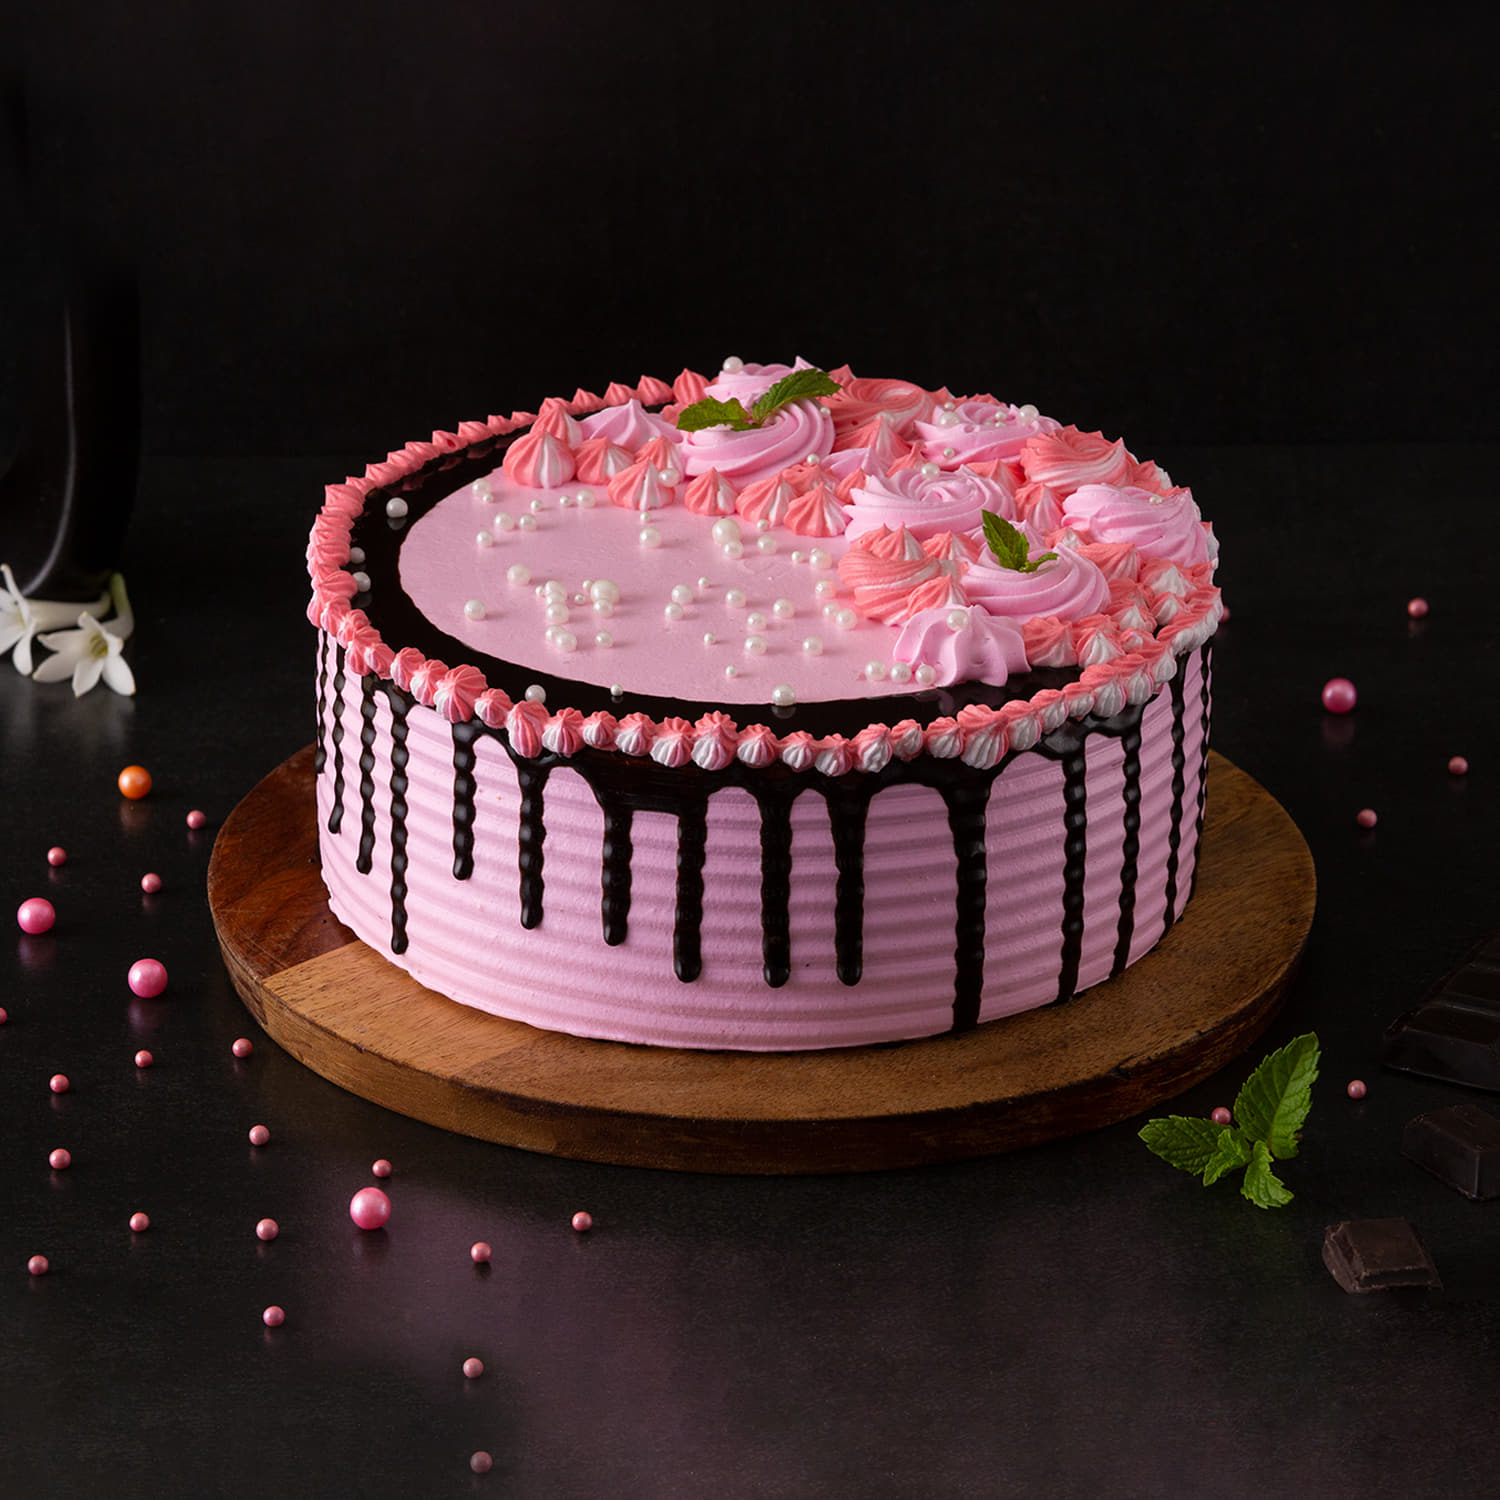 Rich Creamy Chocolate Cake - Buy, Send & Order Online Delivery In India -  Cake2homes